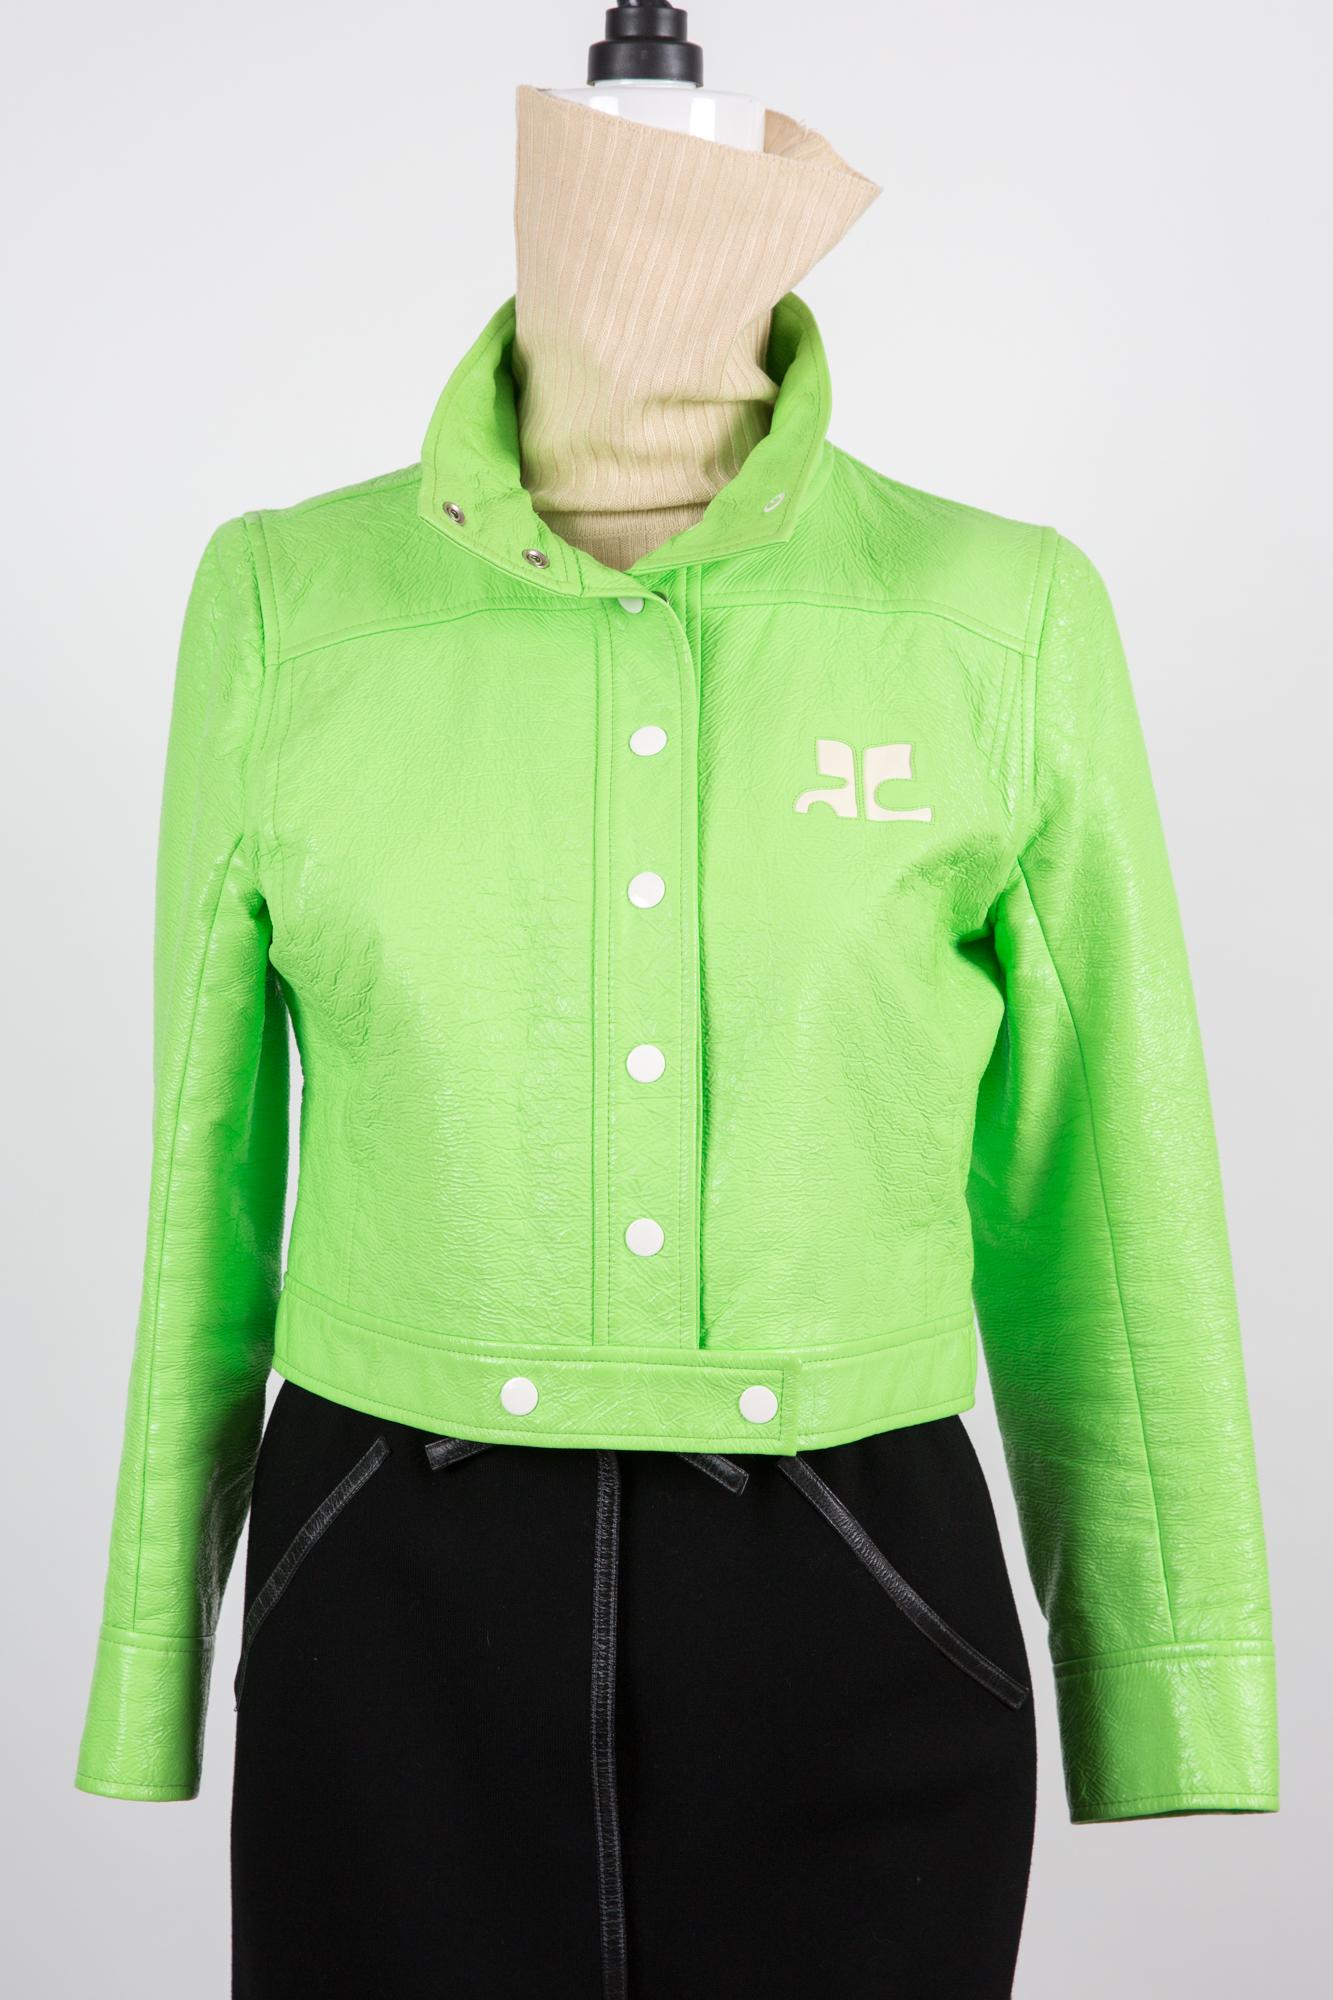 1980's Courreges green Vinyl Reedition jacket featuring adjustable high neck, long sleeves, snap-button fastening, buttoned cuffs, highlighted waist, logo printed on the chest, straight cut, metal finishes.
85% Cotton / 15% Polyurethane
In good